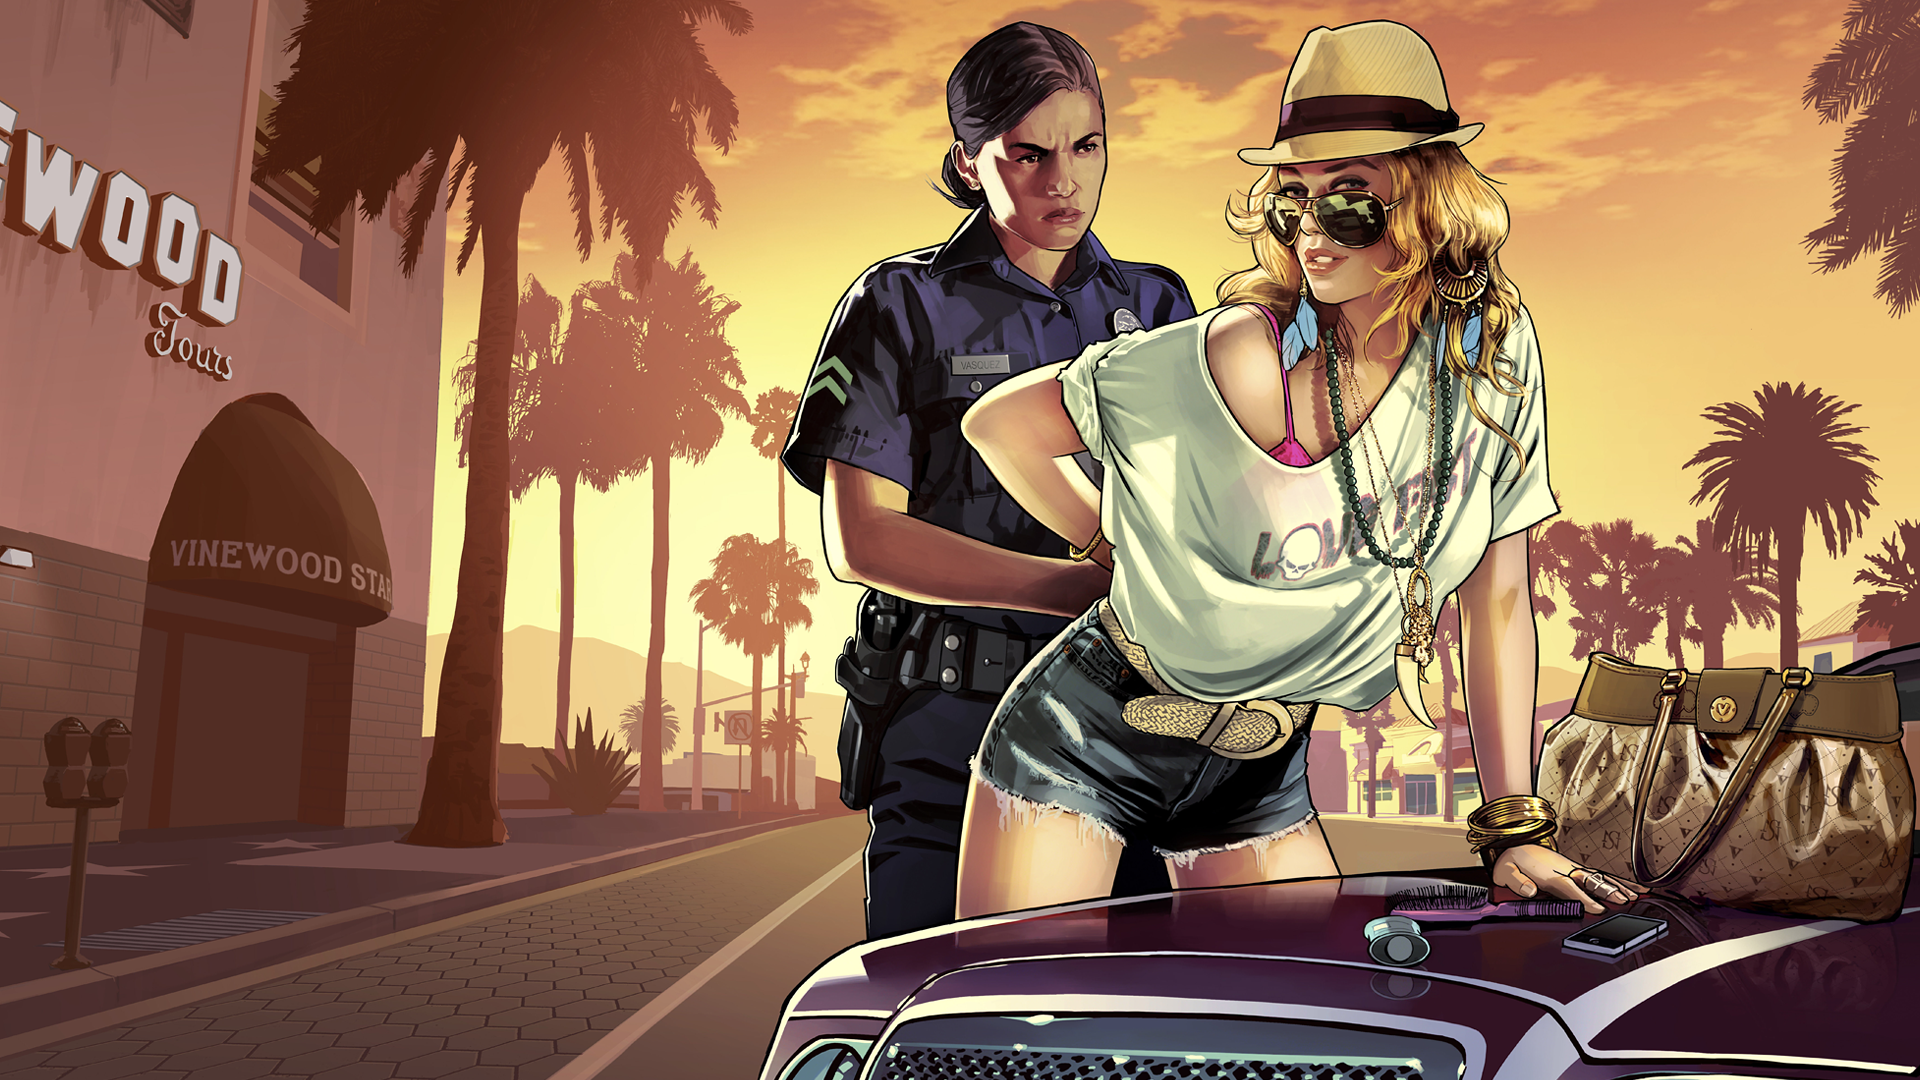 GTA VI leaks show gaming companies need to improve security